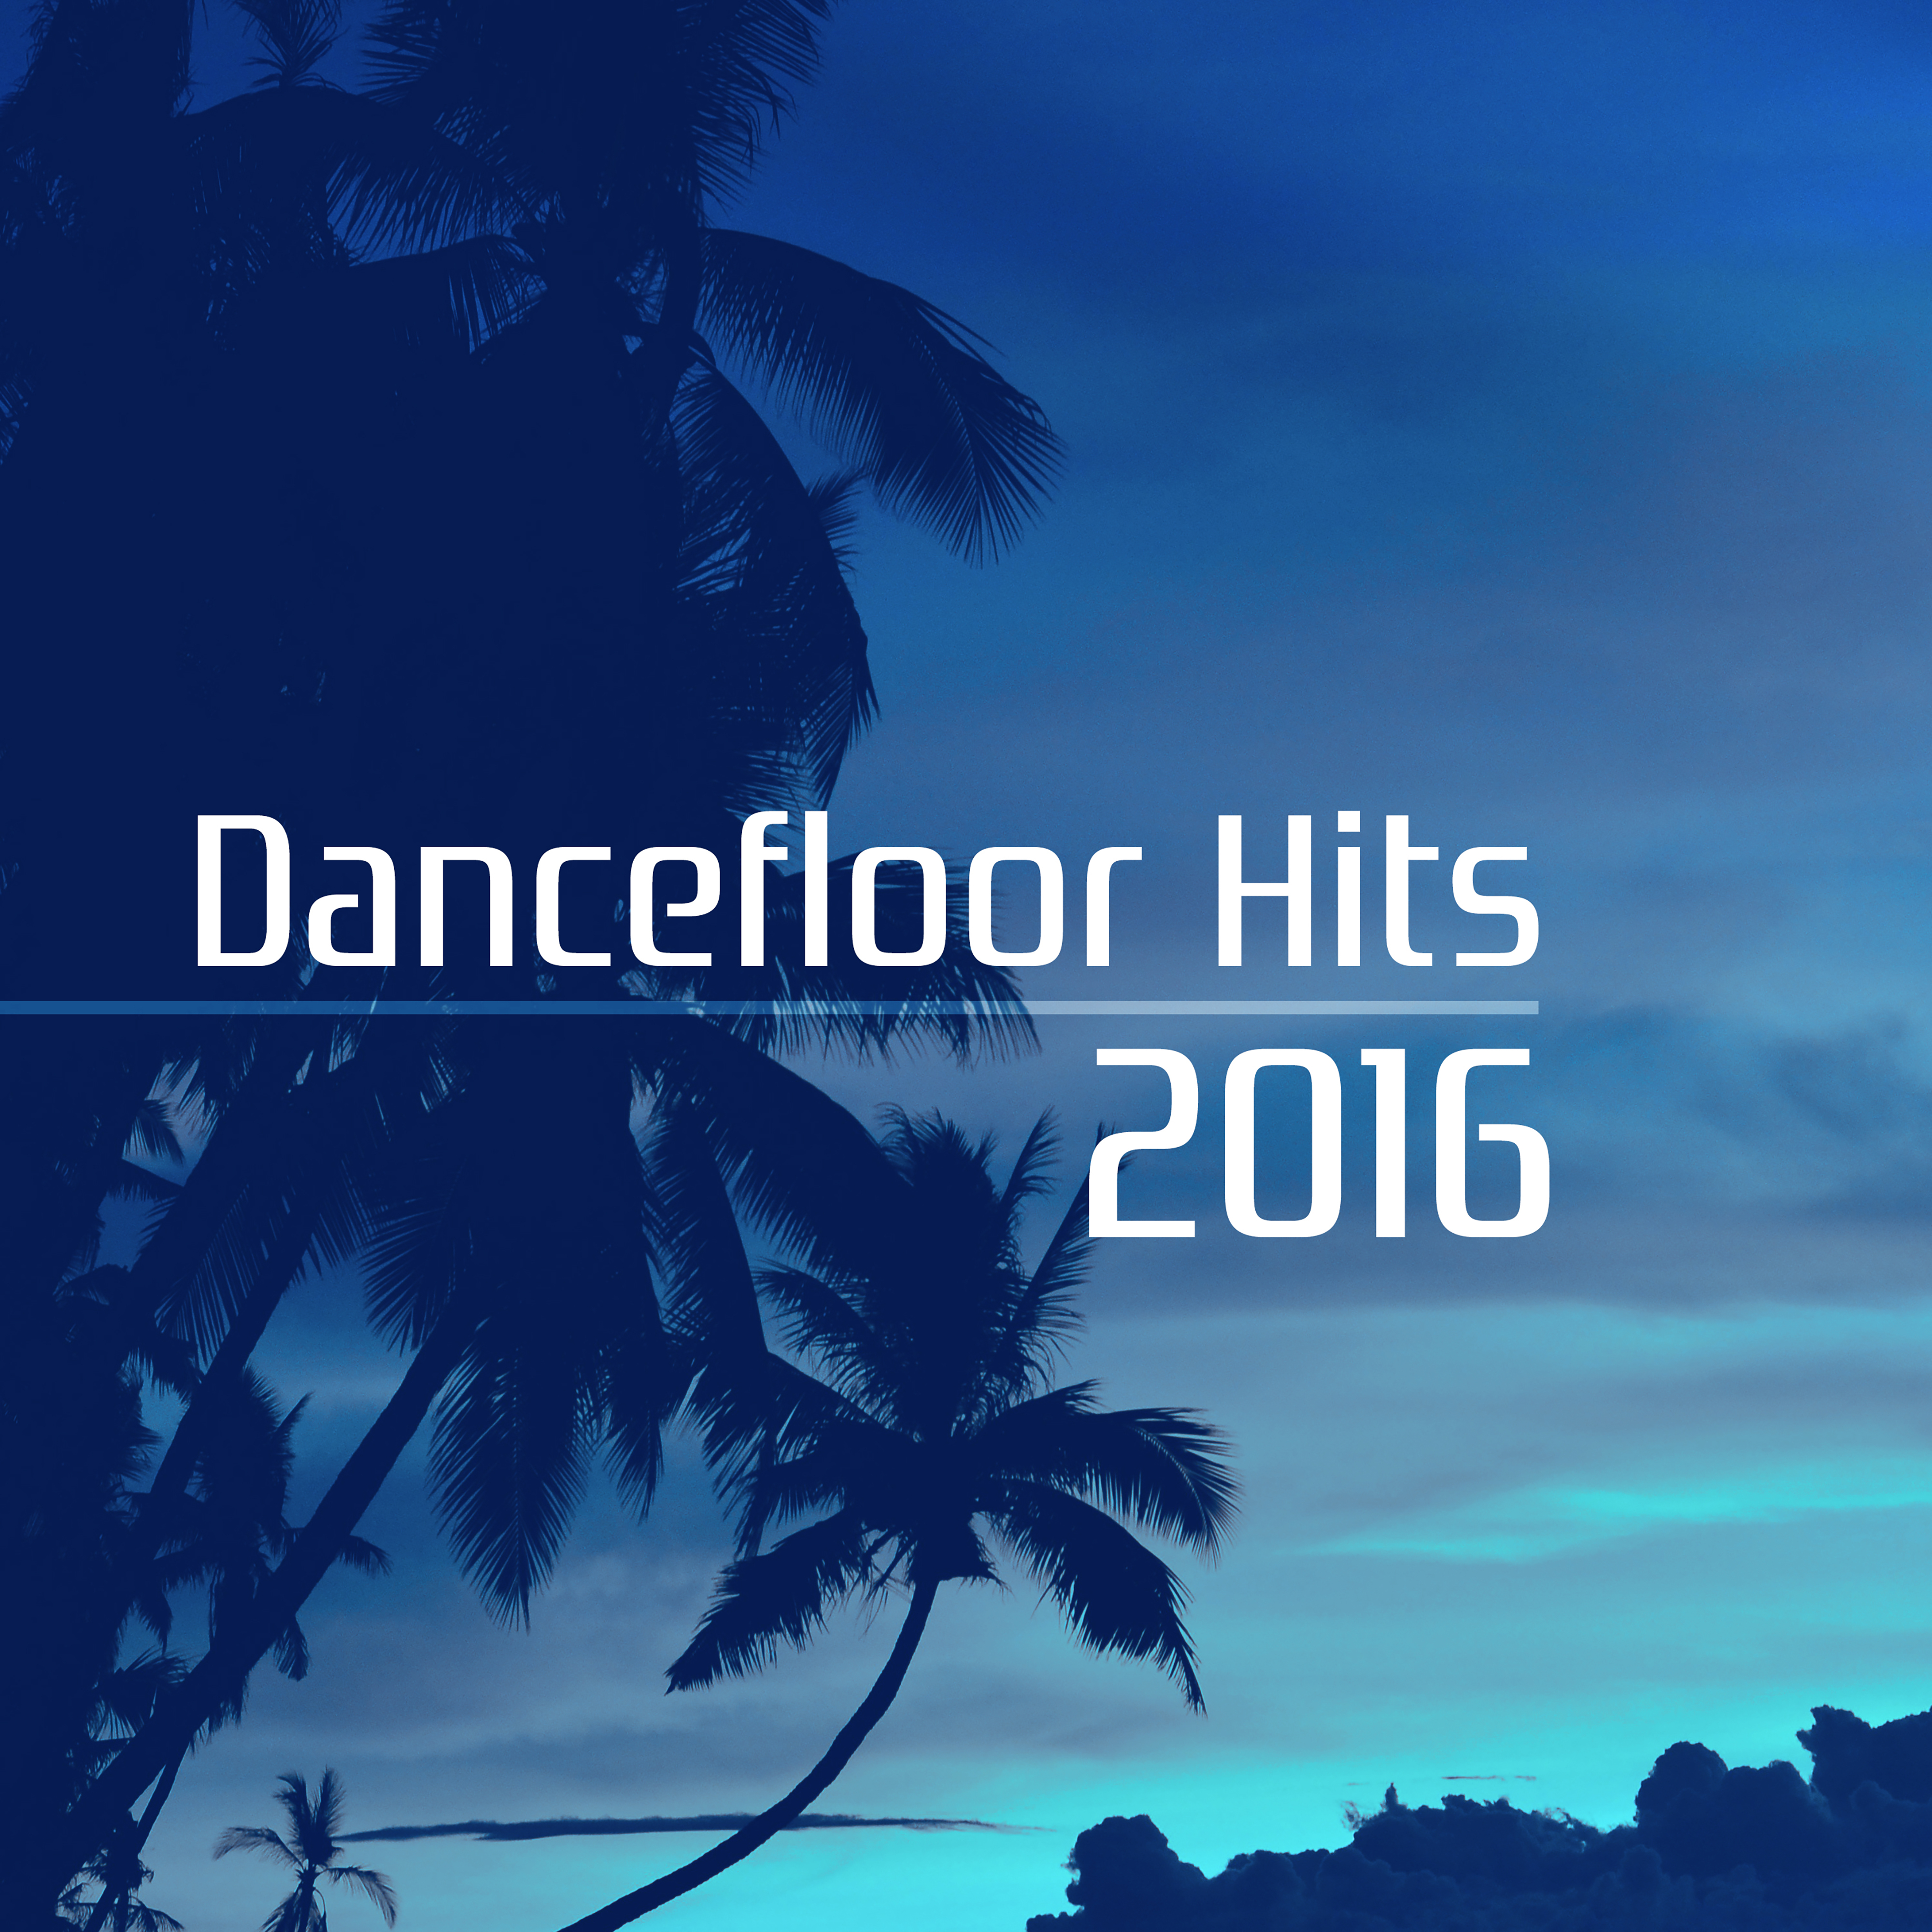 Dancefloor Hits 2016  The Best Tracks of Chill Out 2016, Chill Out Lounge, Electro Music